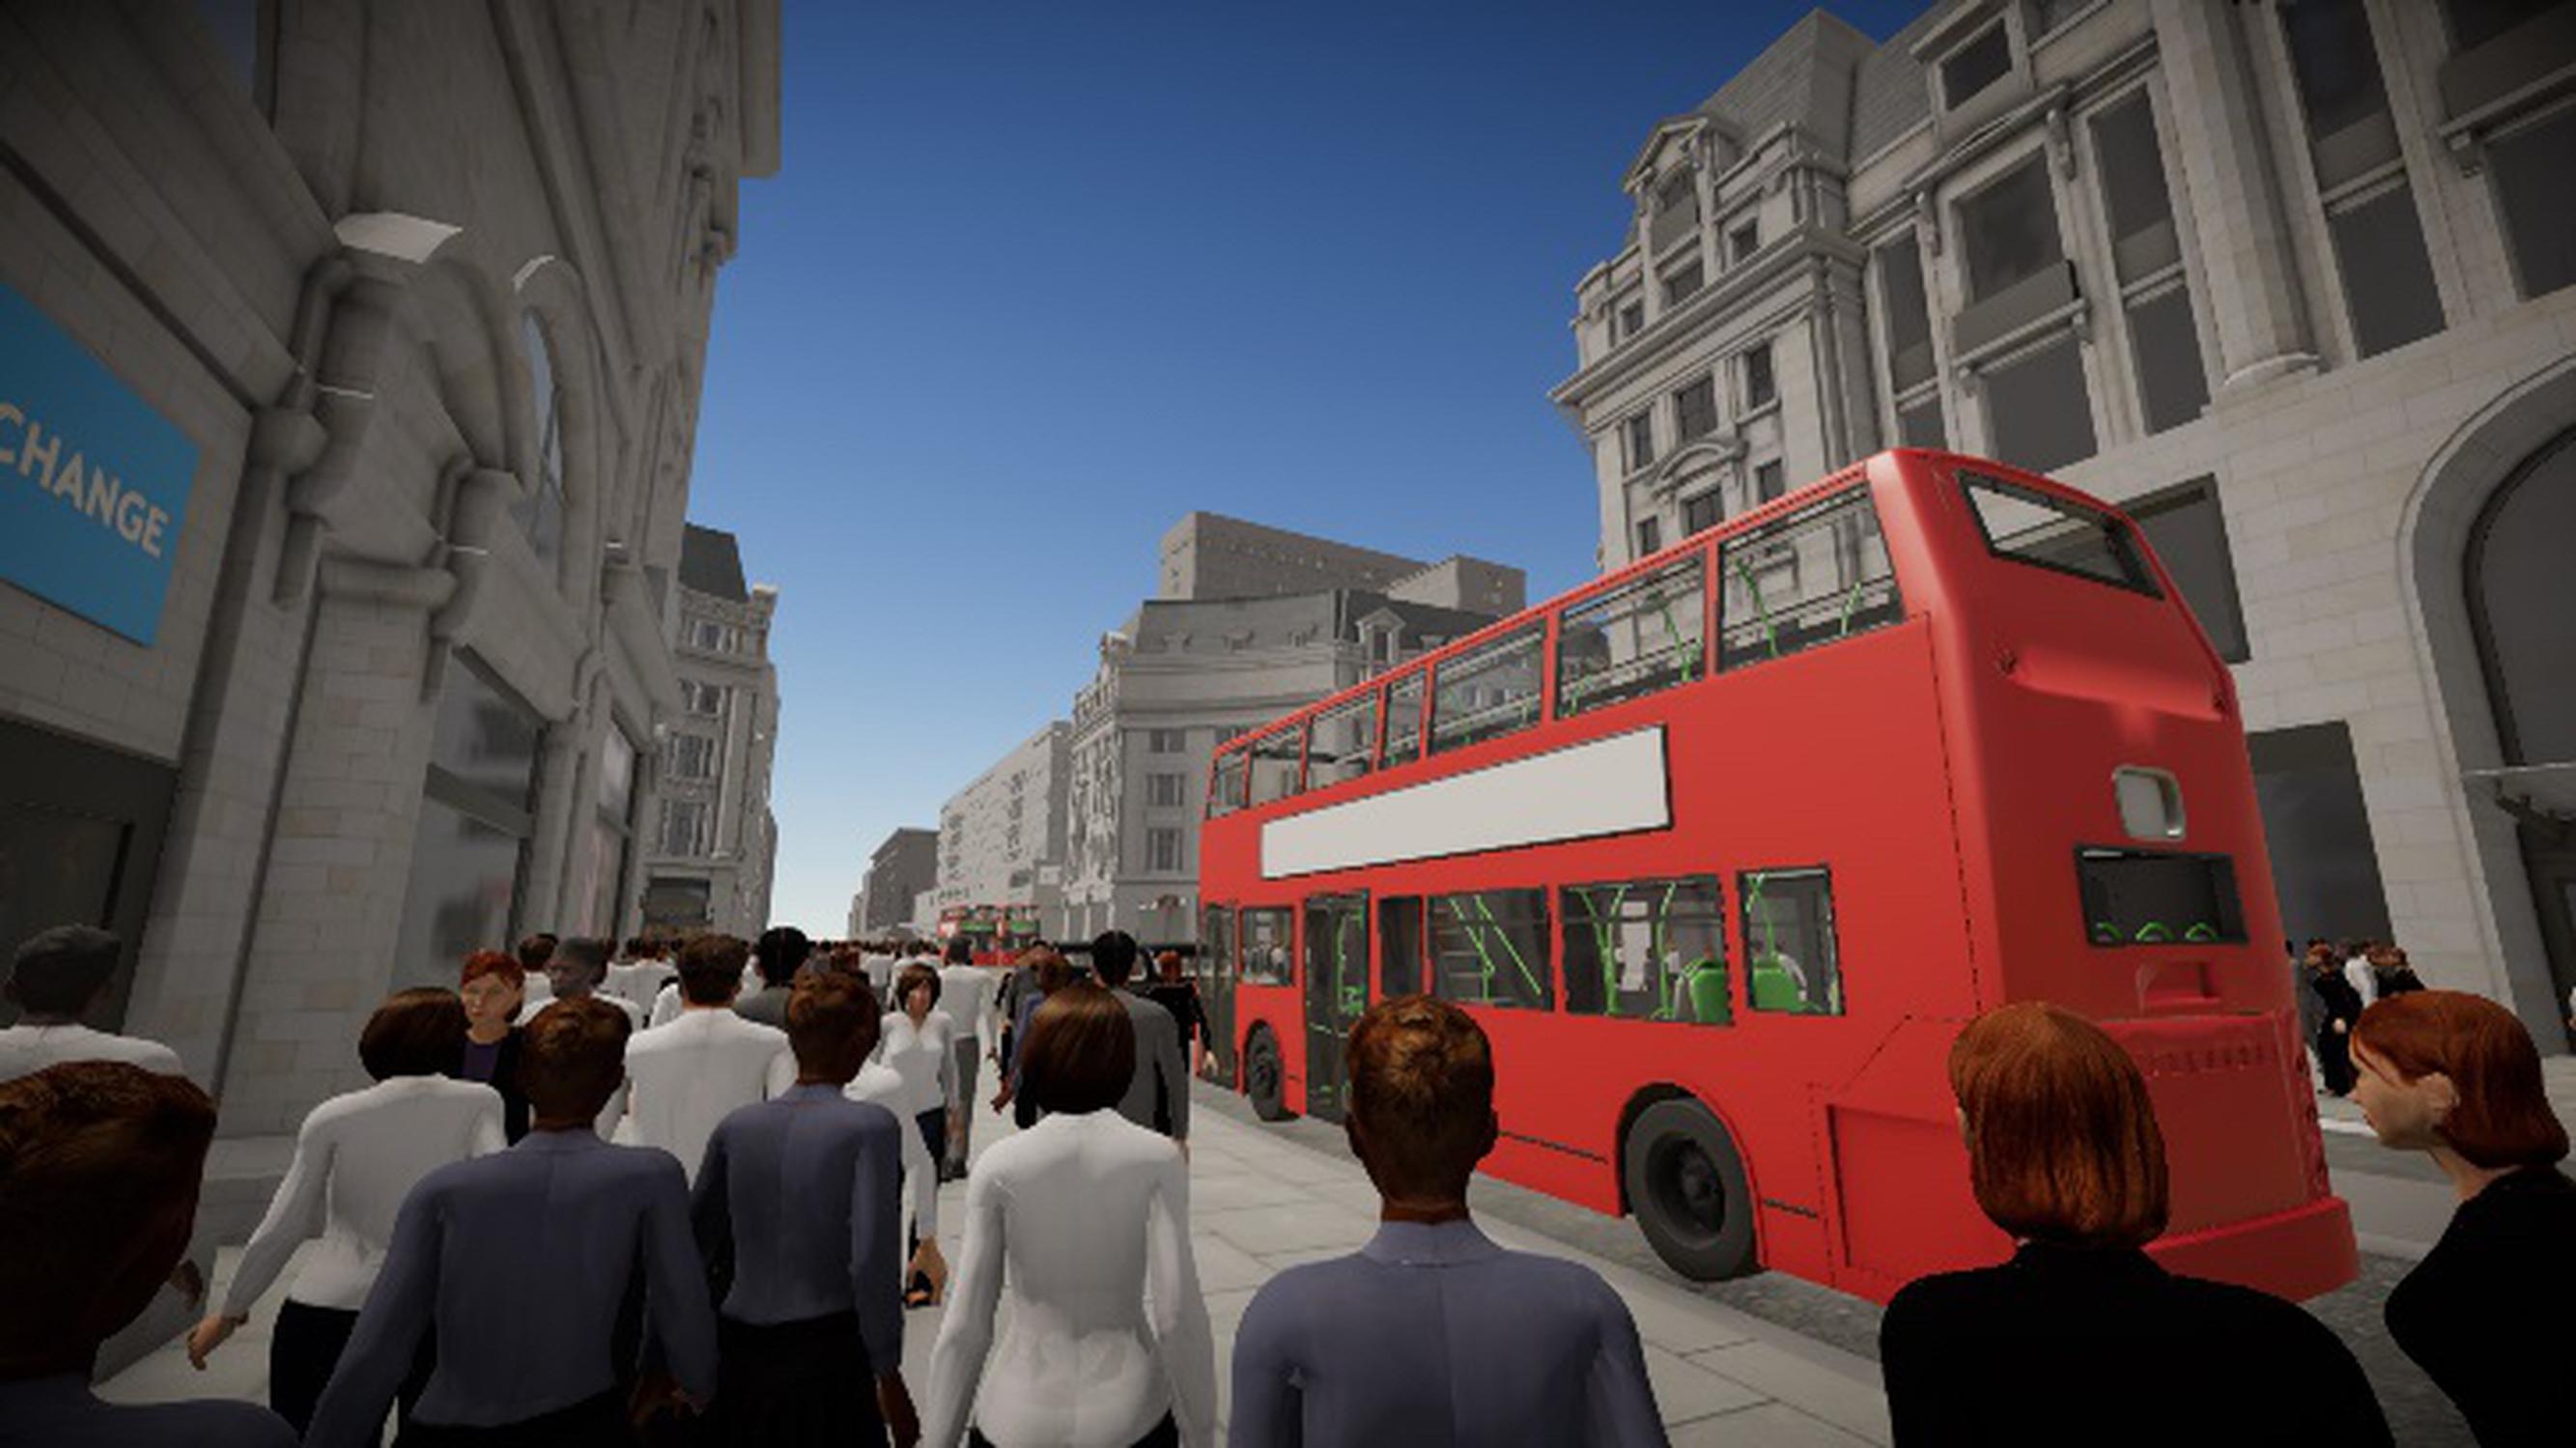 Pedestrian simulation of existing conditions rendered with Virtual Reality